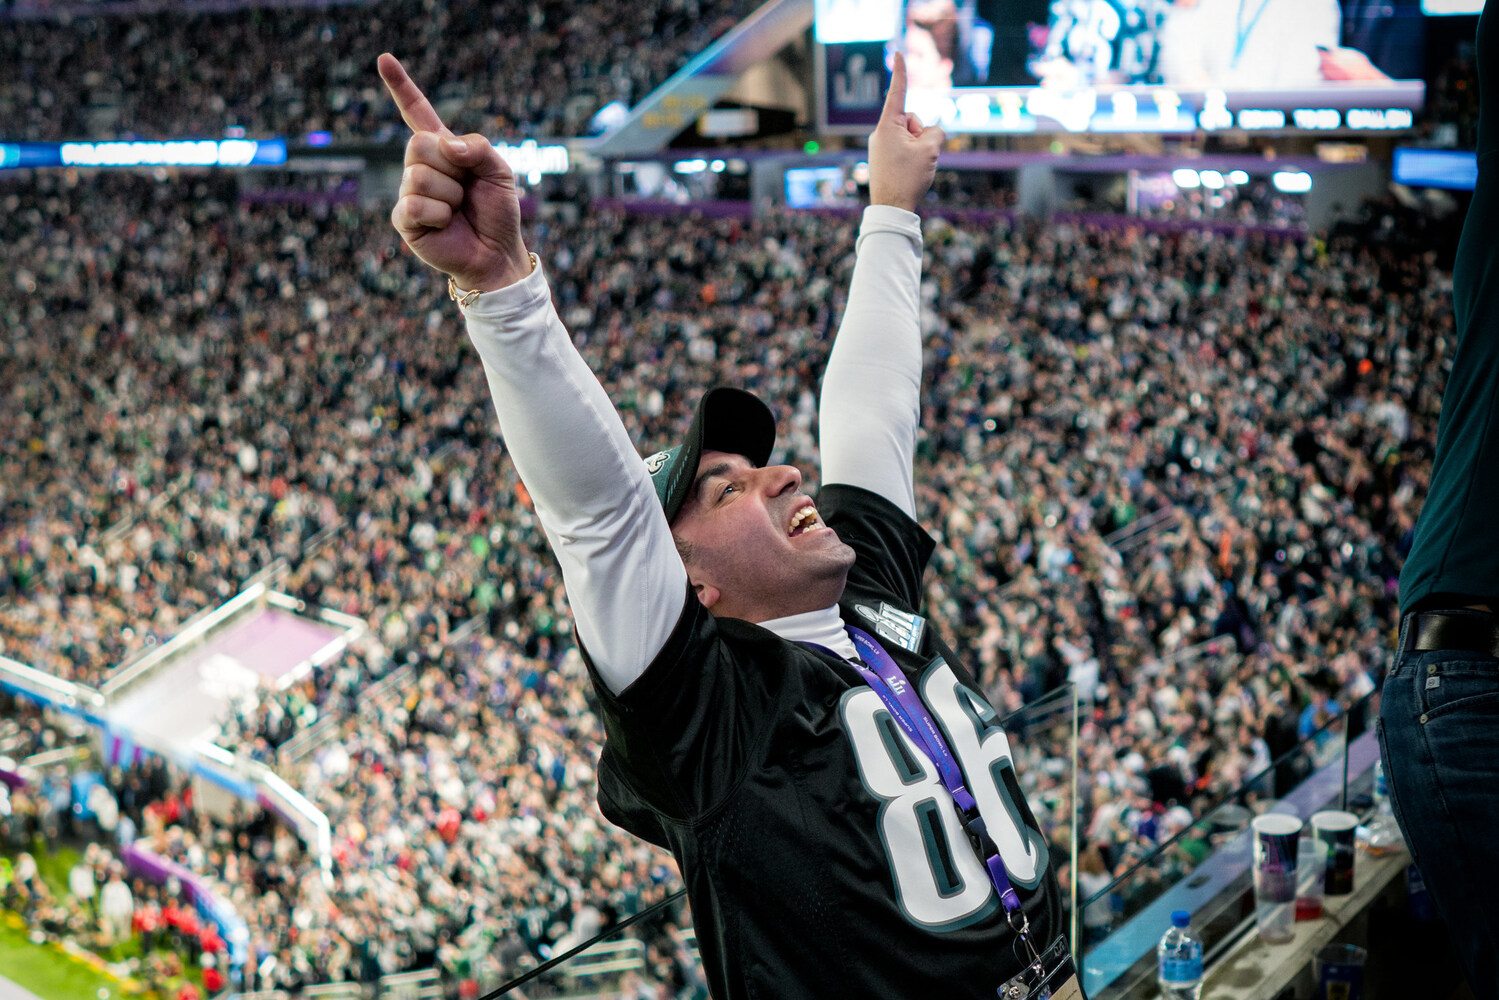 An Eagles fan celebrates in the stands at Super Bowl LII